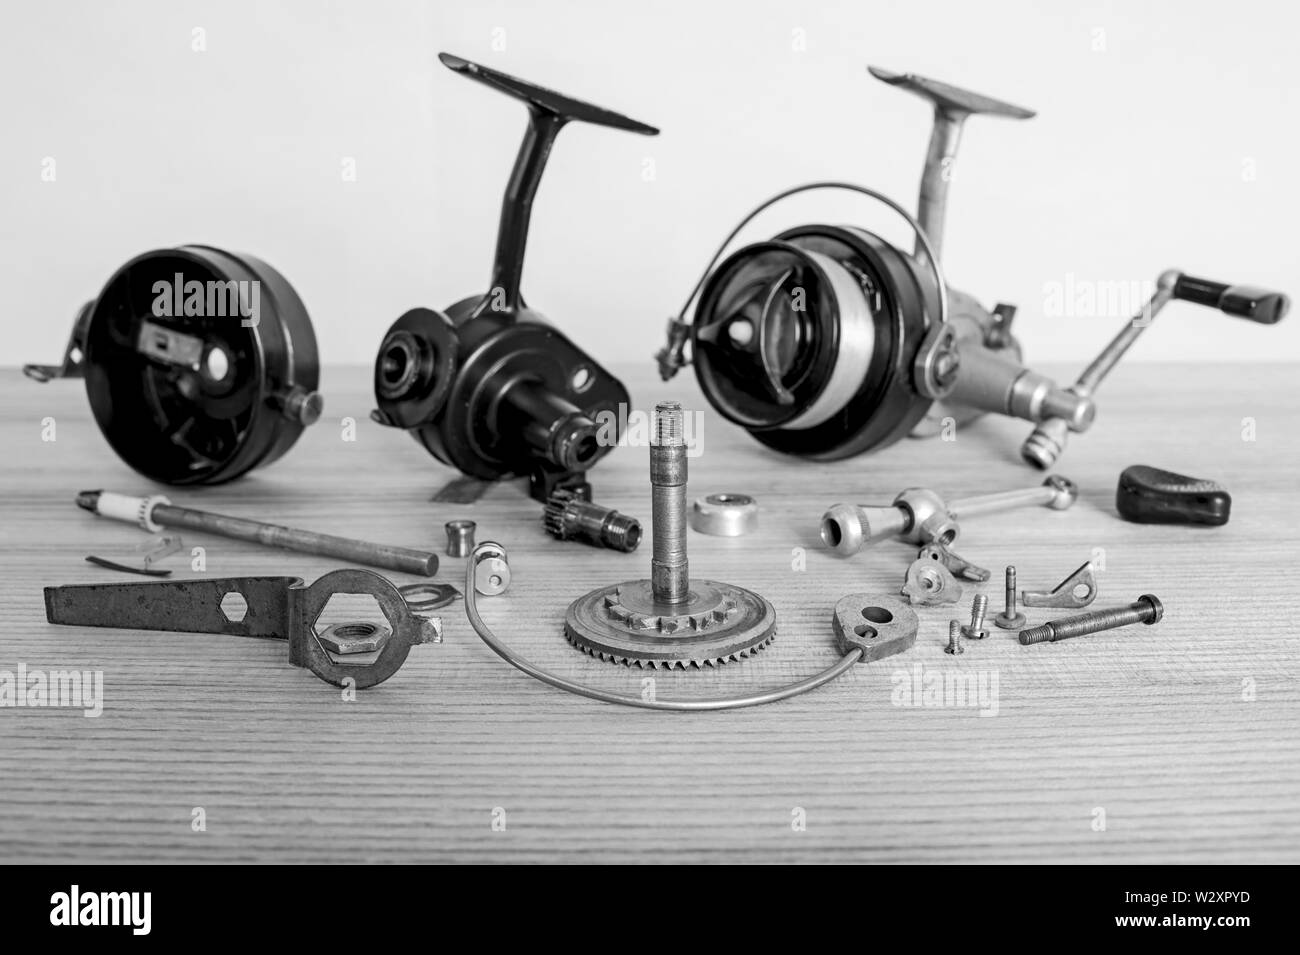 A fishing spinning reel as a whole and a second similar completely disassembled. Black and white image. Stock Photo